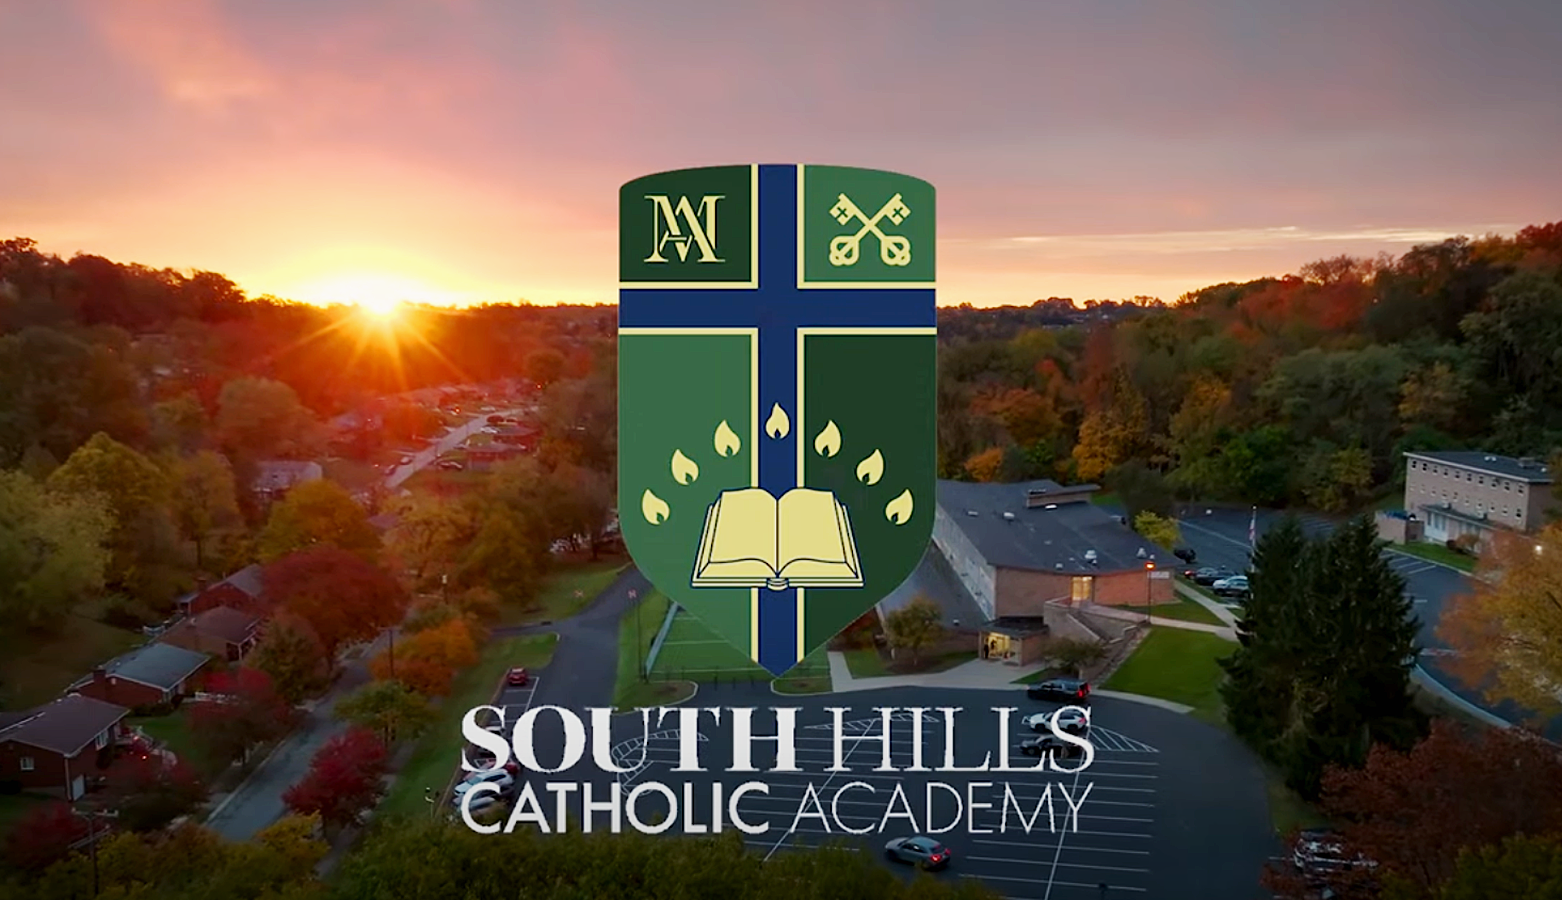 This is South Hills Catholic Academy